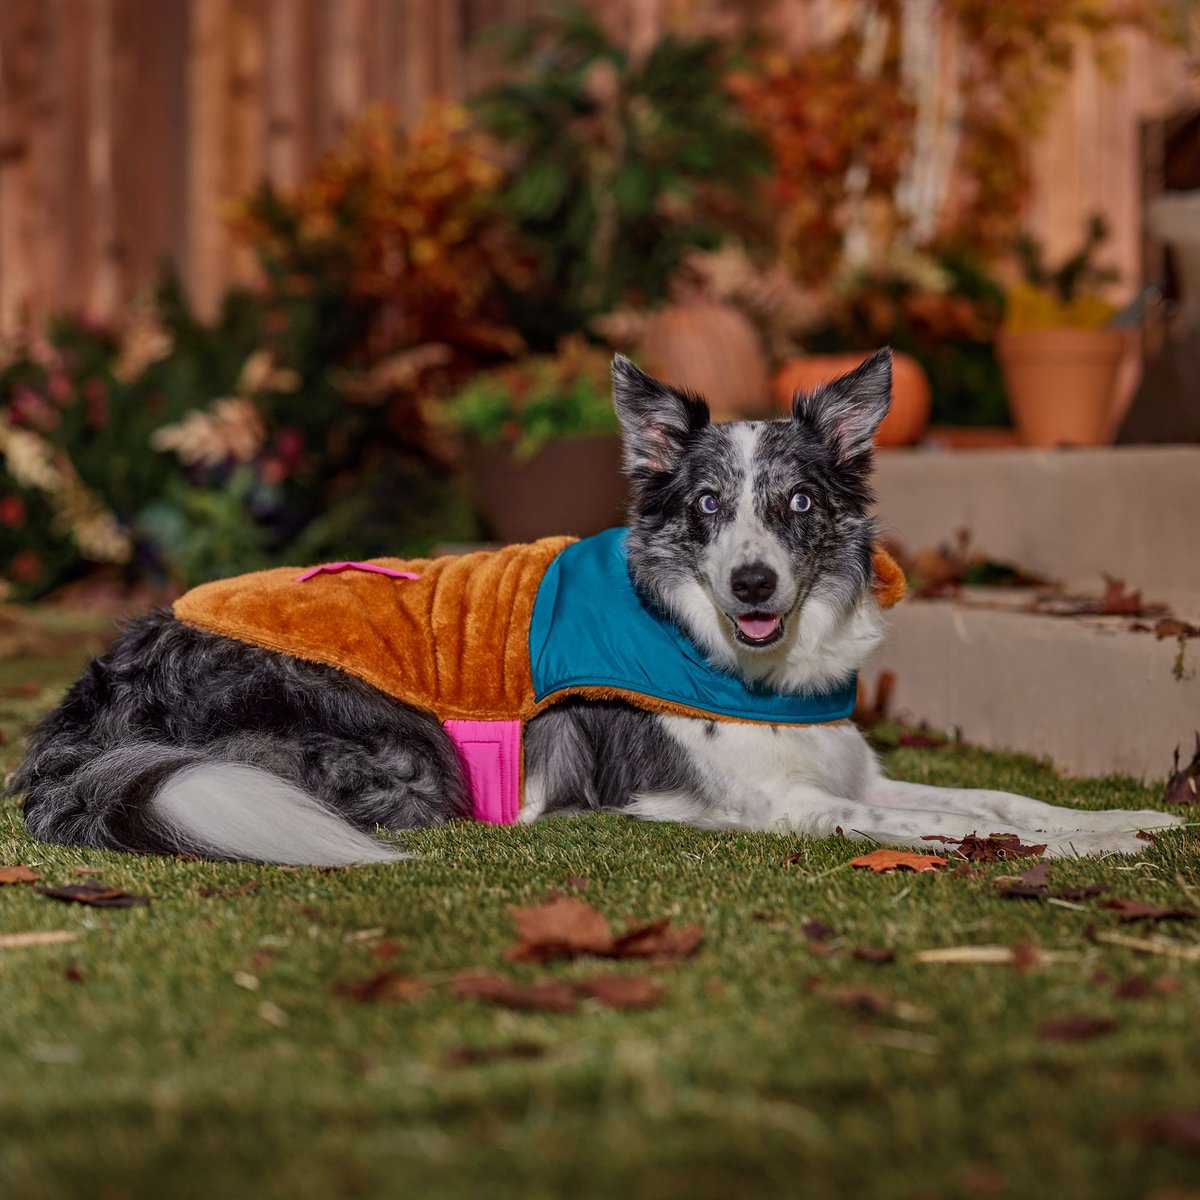 Fall Fun For You and Your Pet